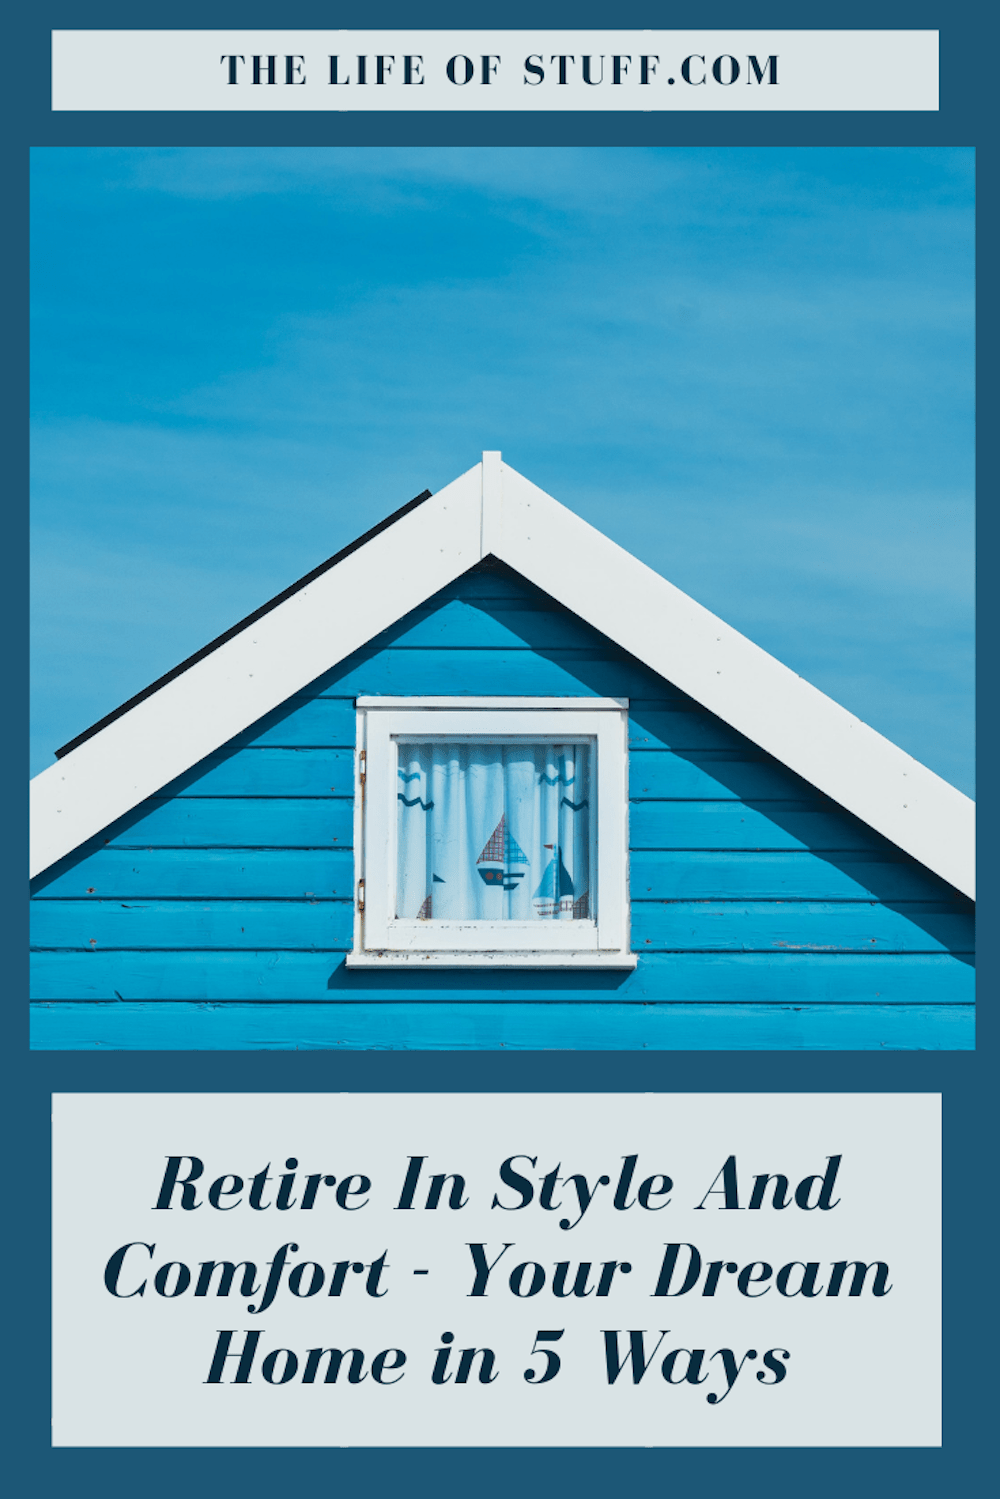 Retire In Style And Comfort - Your Dream Home in 5 Ways - The Life of Stuff